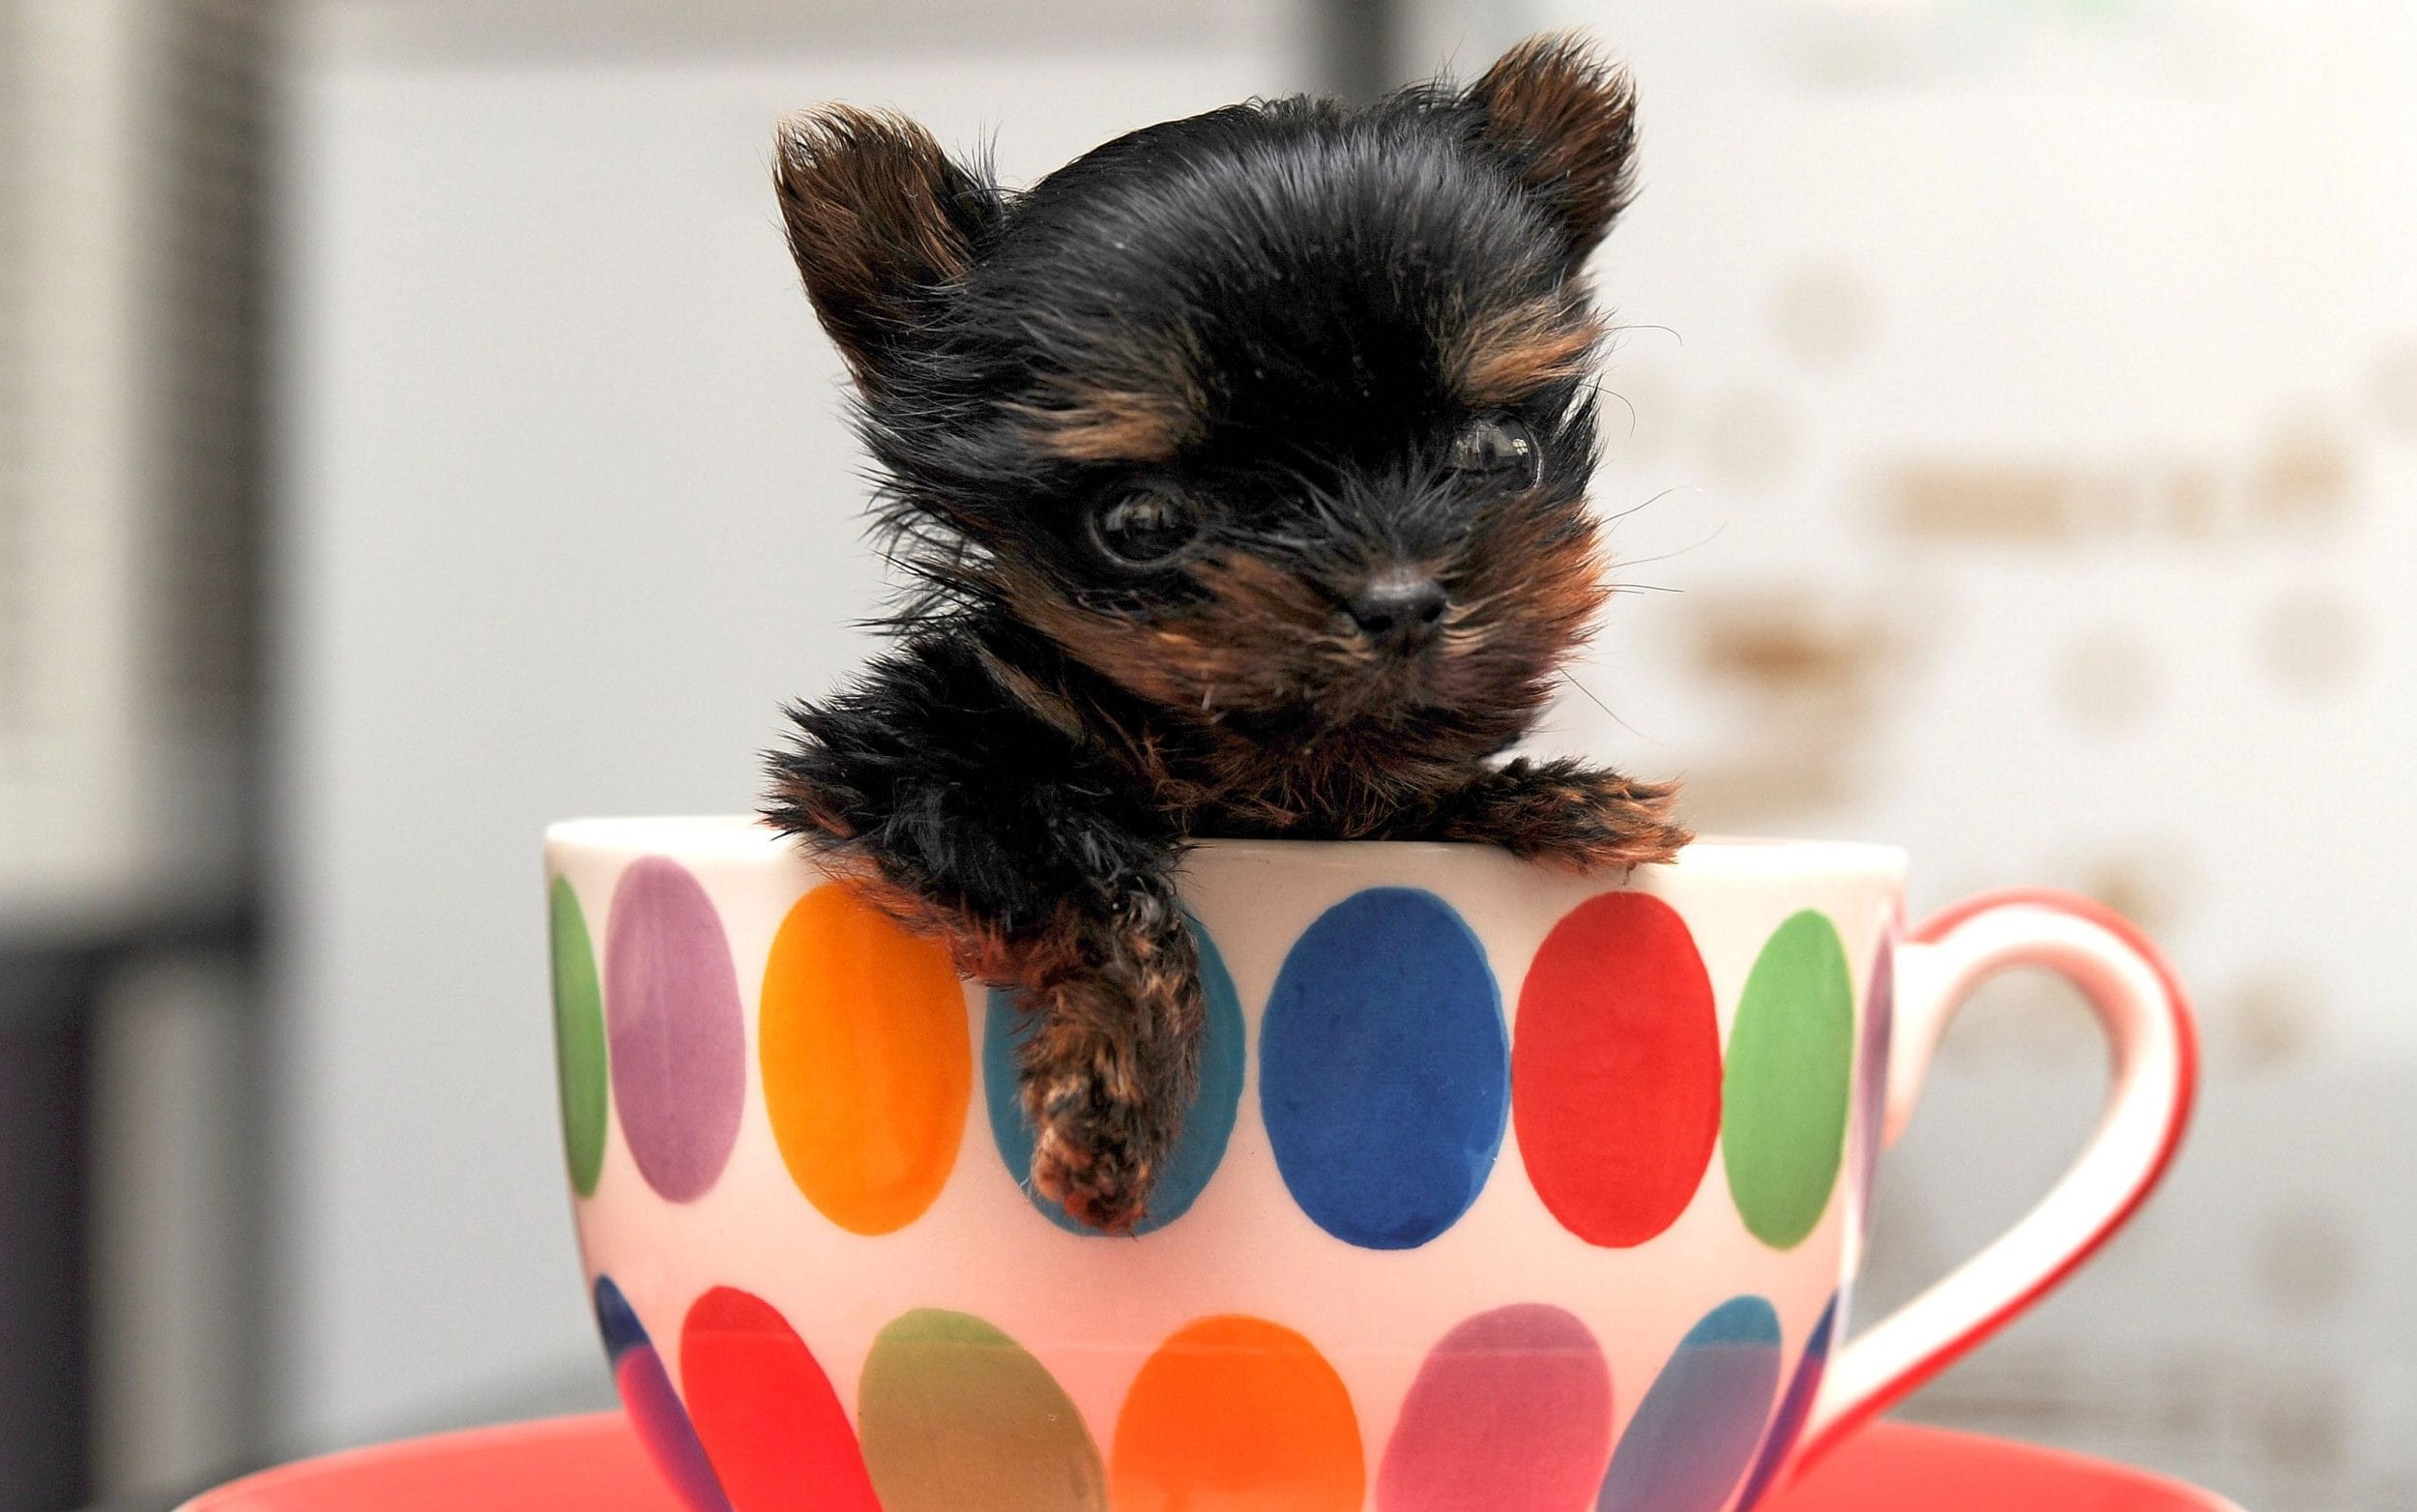 Dog organisations warn of craze for tiny 'teacup puppies' as